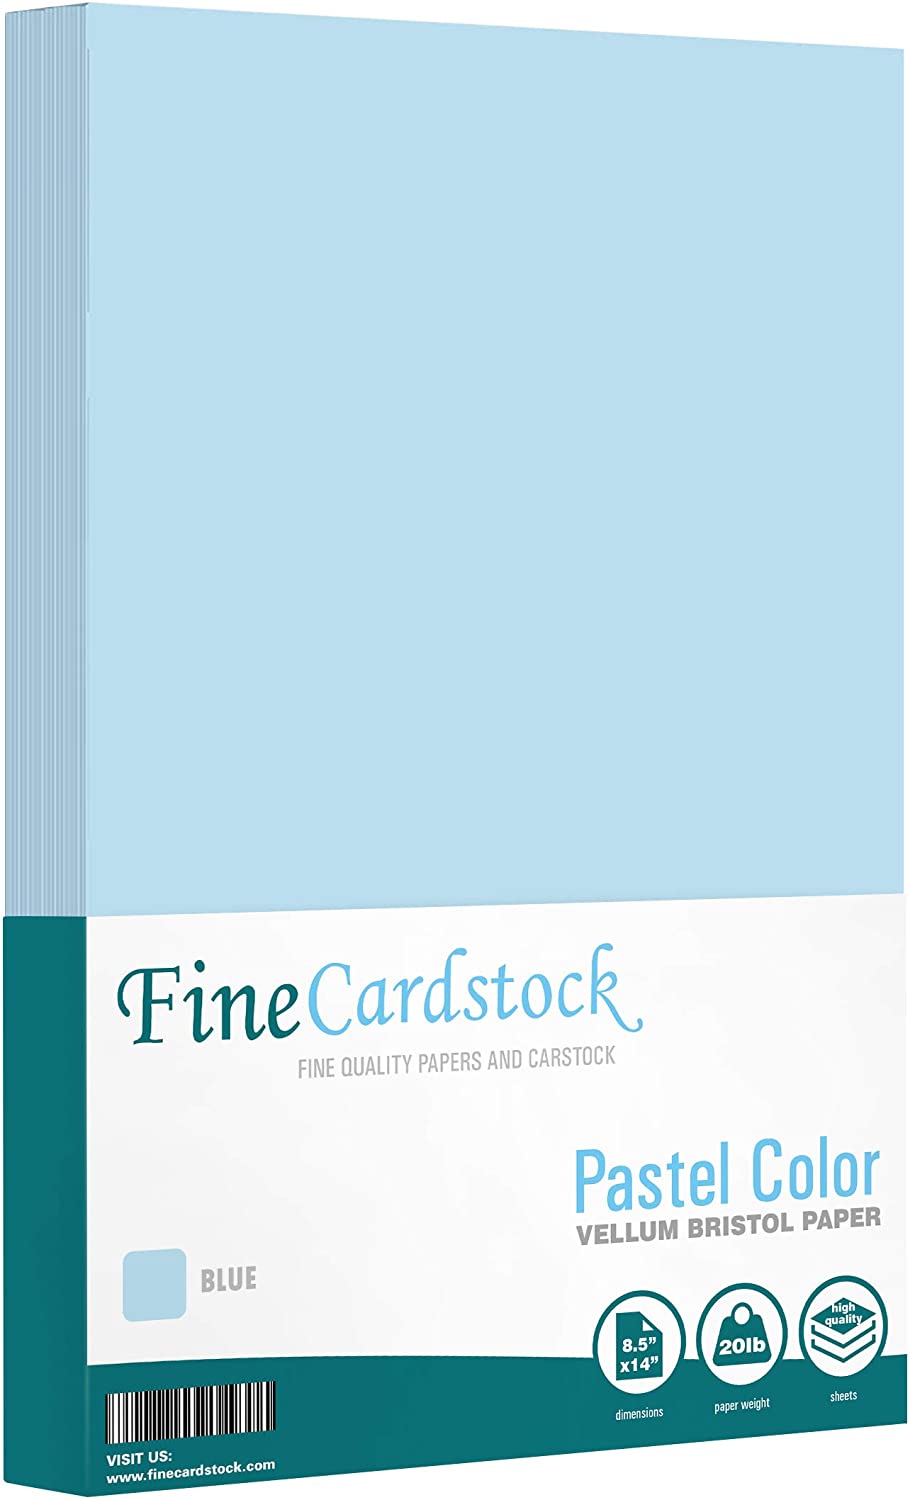 8.5 x 14” Pastel Color Paper – Great for Cards and Stationery Printing | Legal, Menu Size | Lightweight 20lb Paper | 100 Sheets | Blue - image 1 of 6